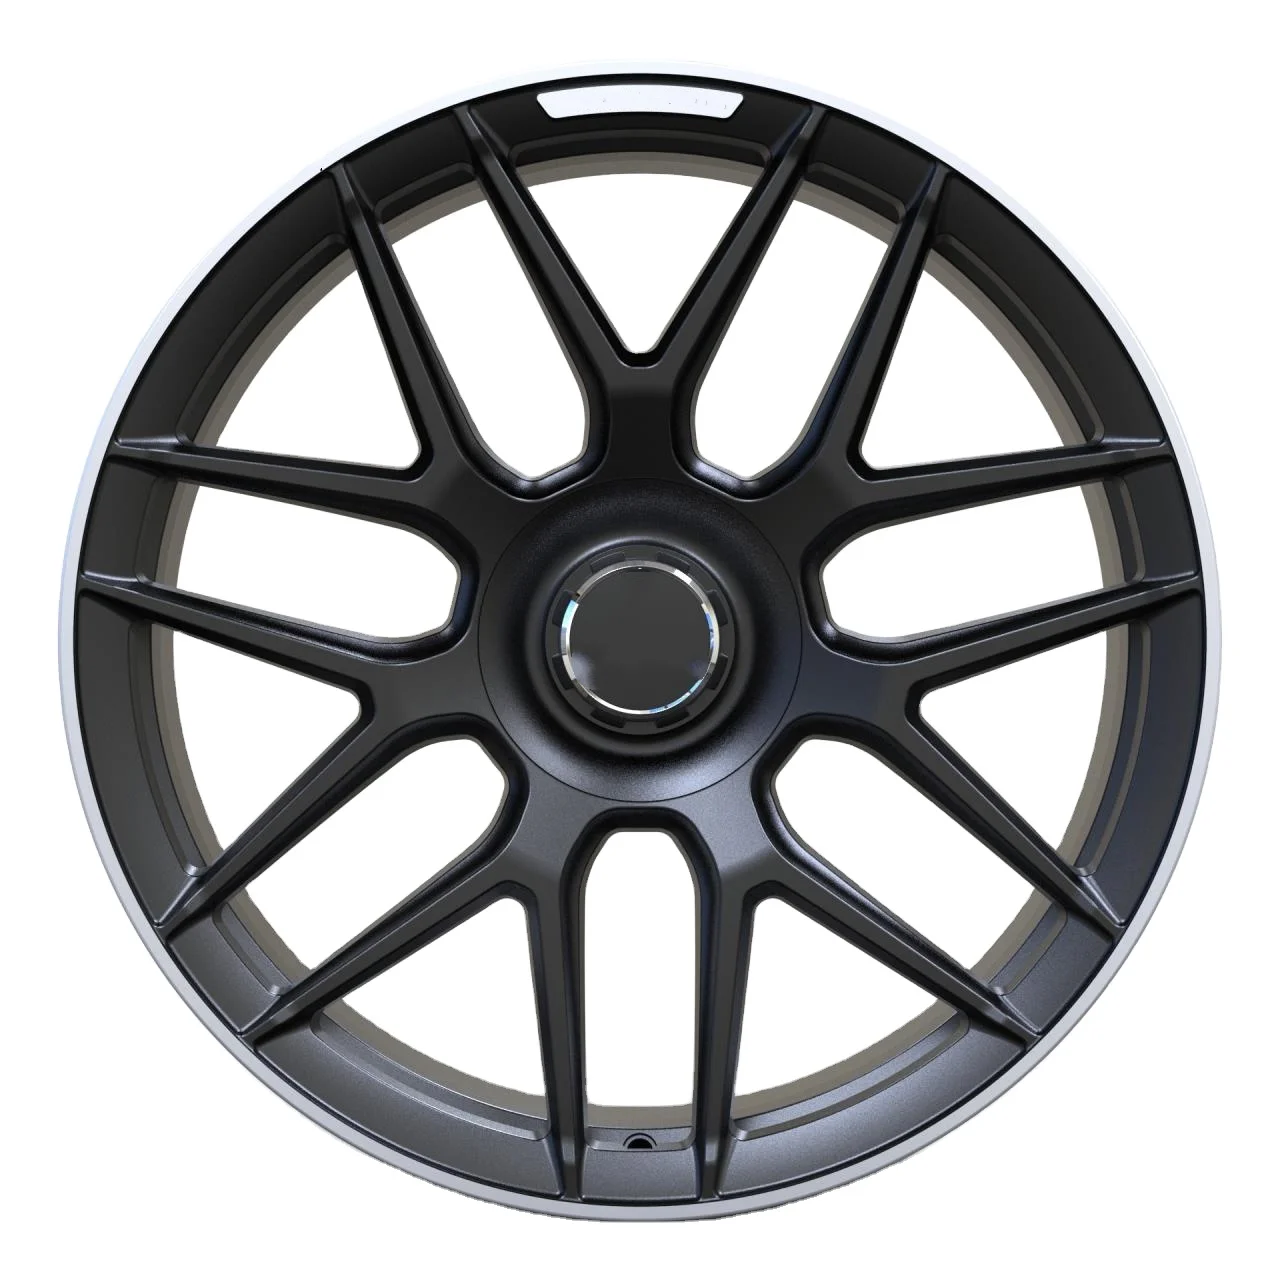 

China 6061-T6 aluminum 20*9.5 alloy 5*112 car forged wheels for amg black